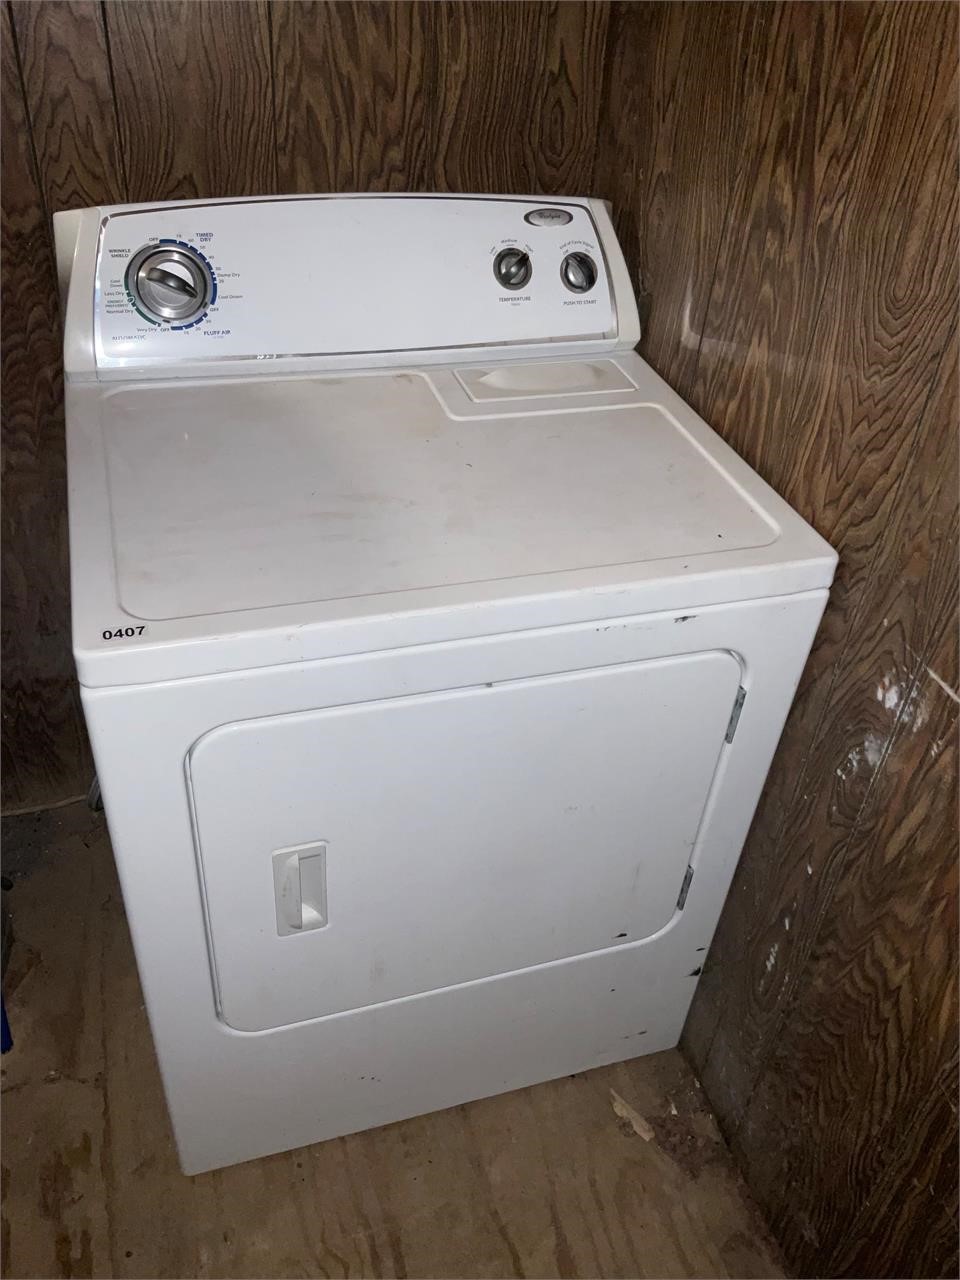 Whirlpool Electric Dryer- hooked up and working